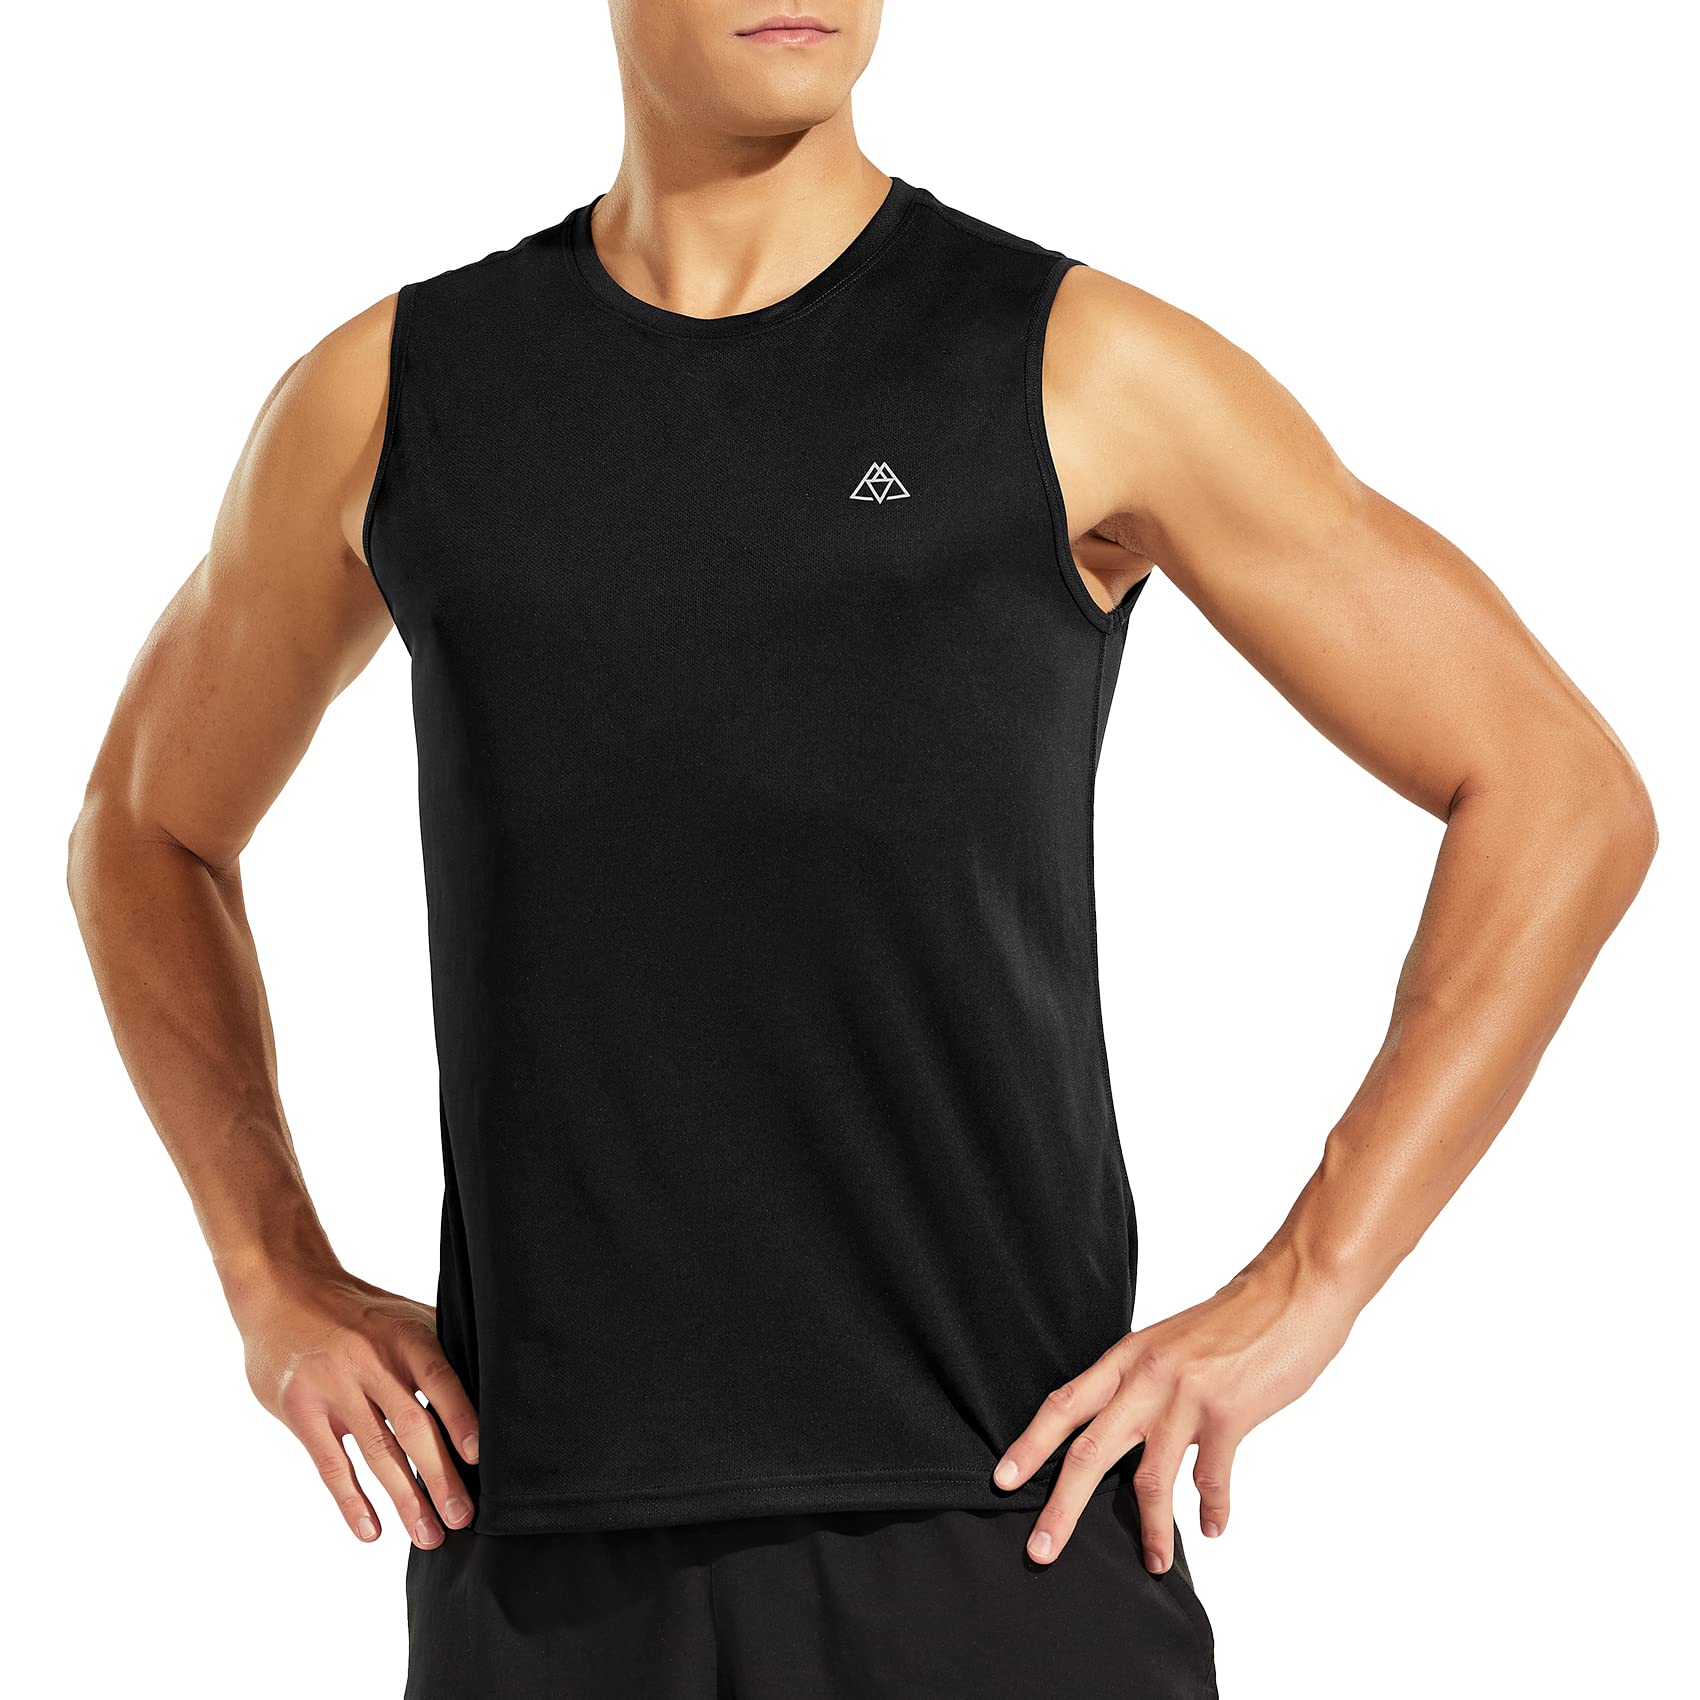 Men's Sleeveless Workout Athletic Shirts Dry Fit Tank Top - Black / S